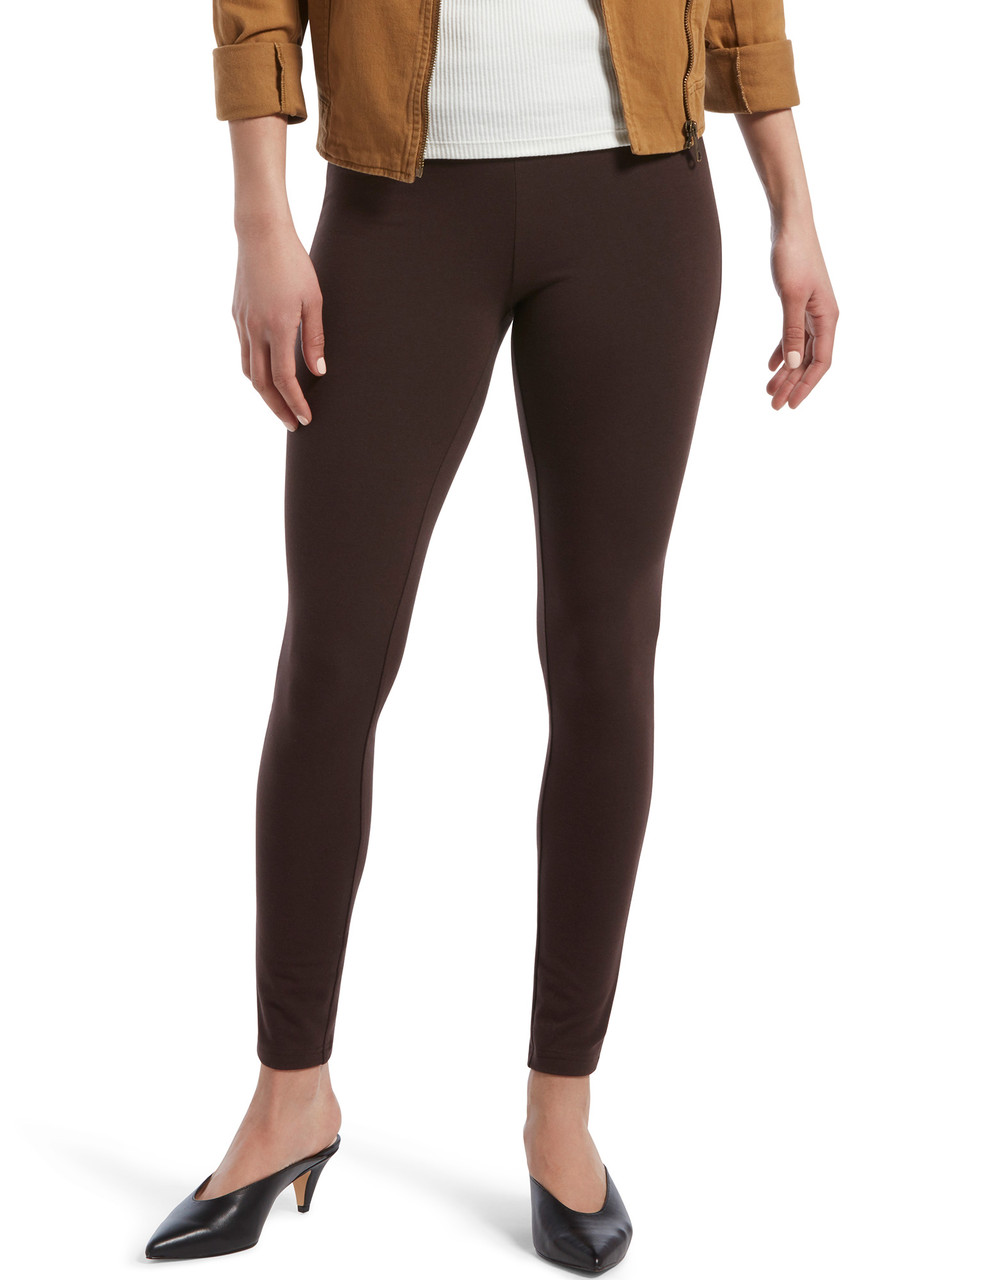 Shop Silky Value Cotton Legging with Wide 'Yoke' Waistband at